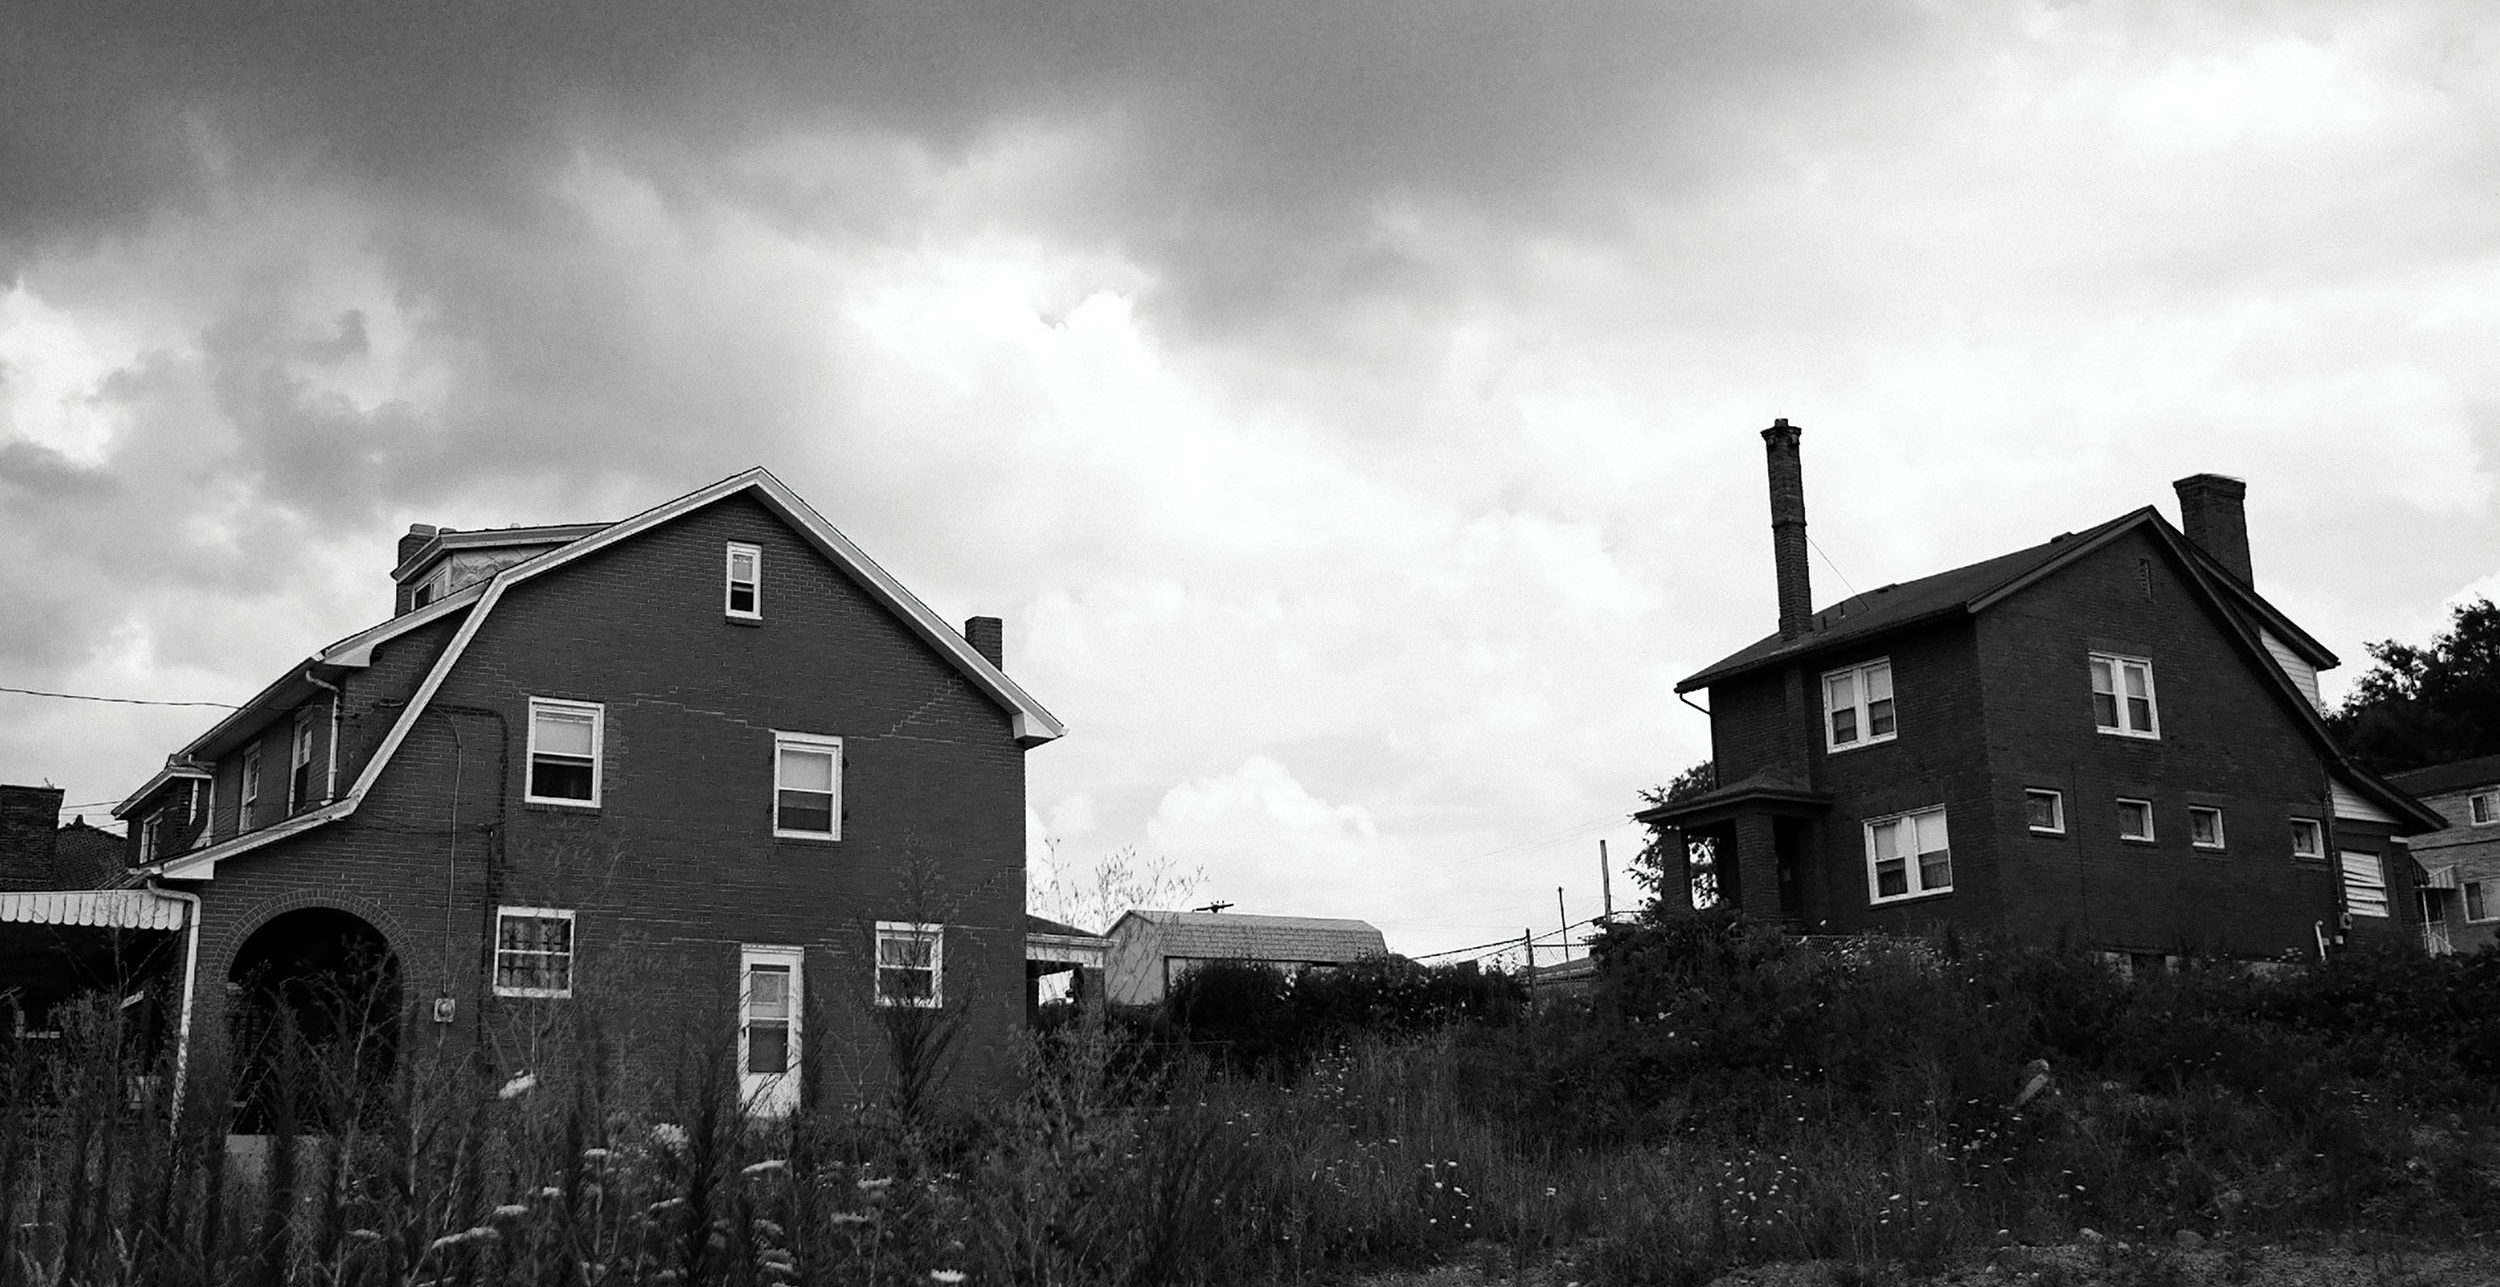 A black and white photo of two abandoned homes